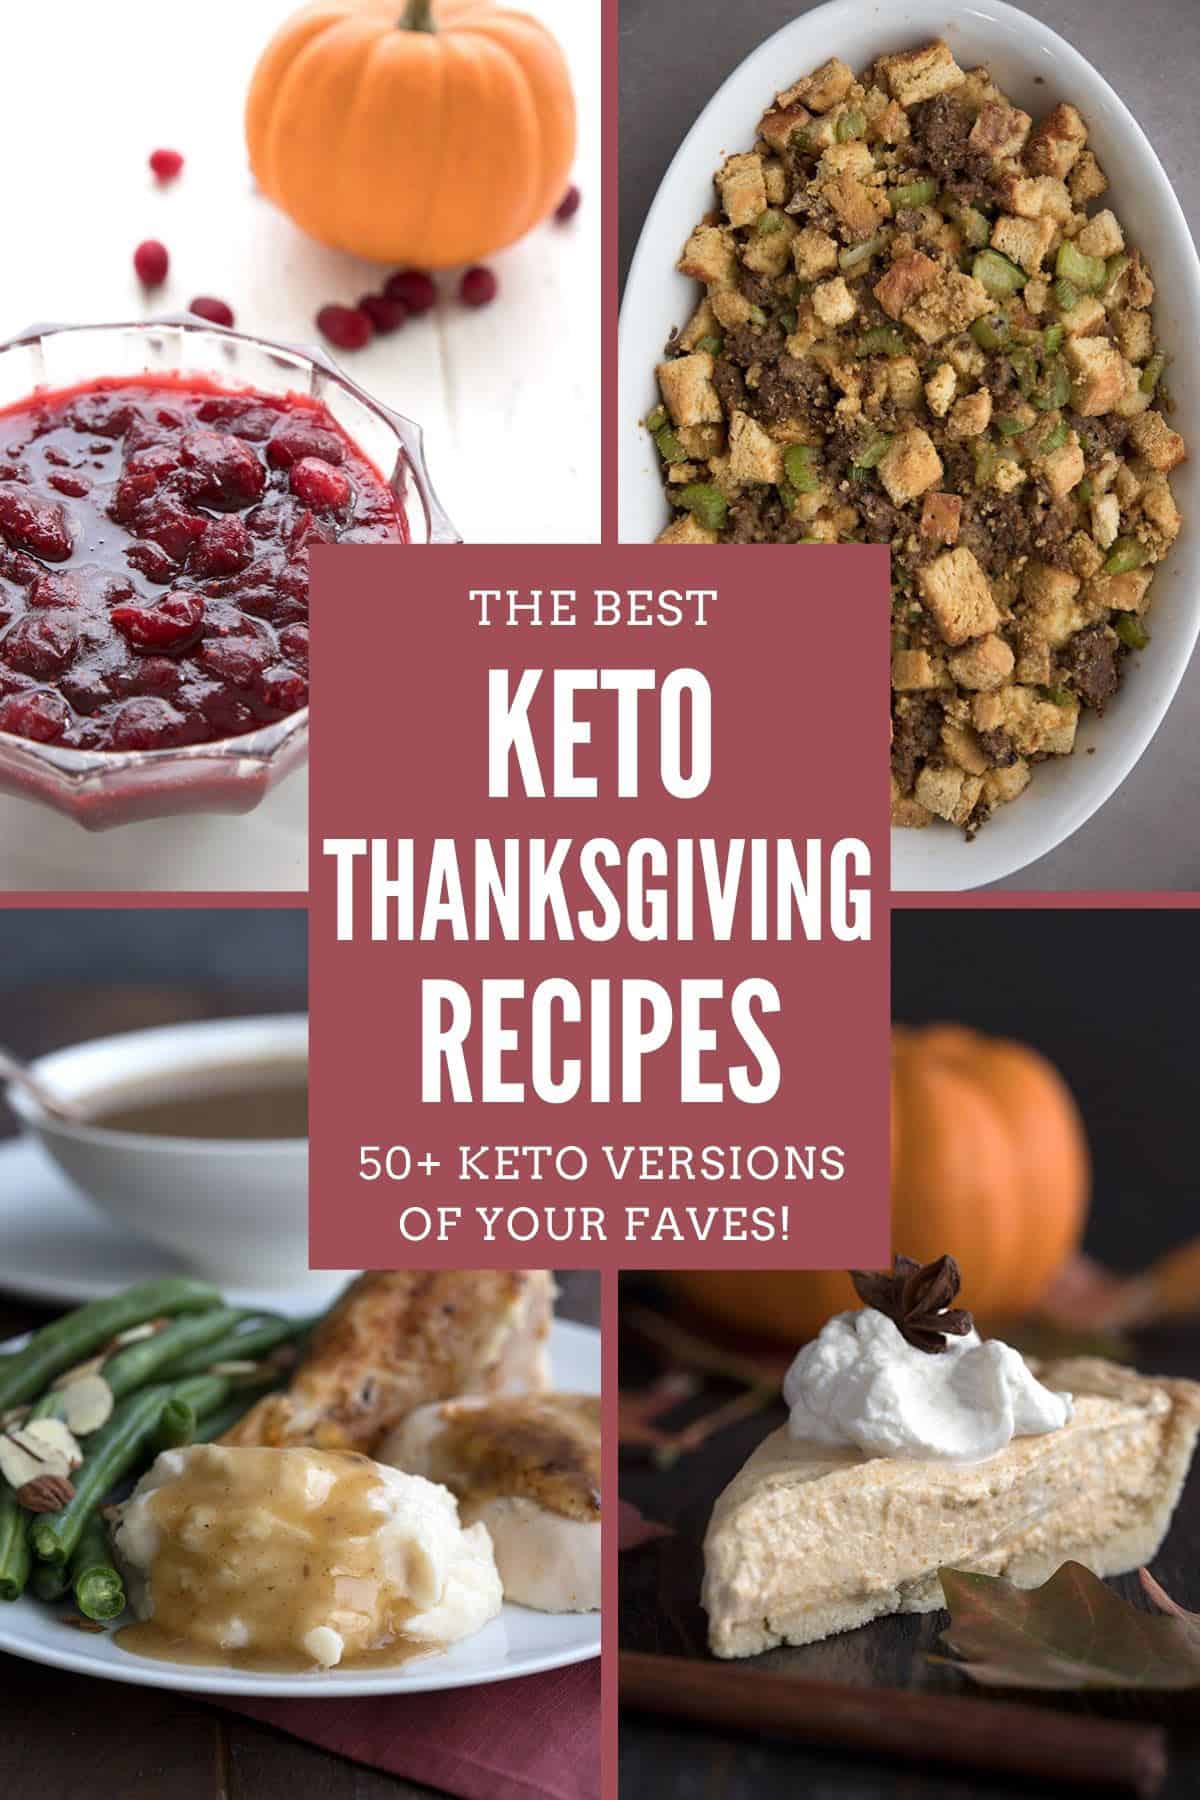 The Best Keto Thanksgiving Recipes - All Day I Dream About Food